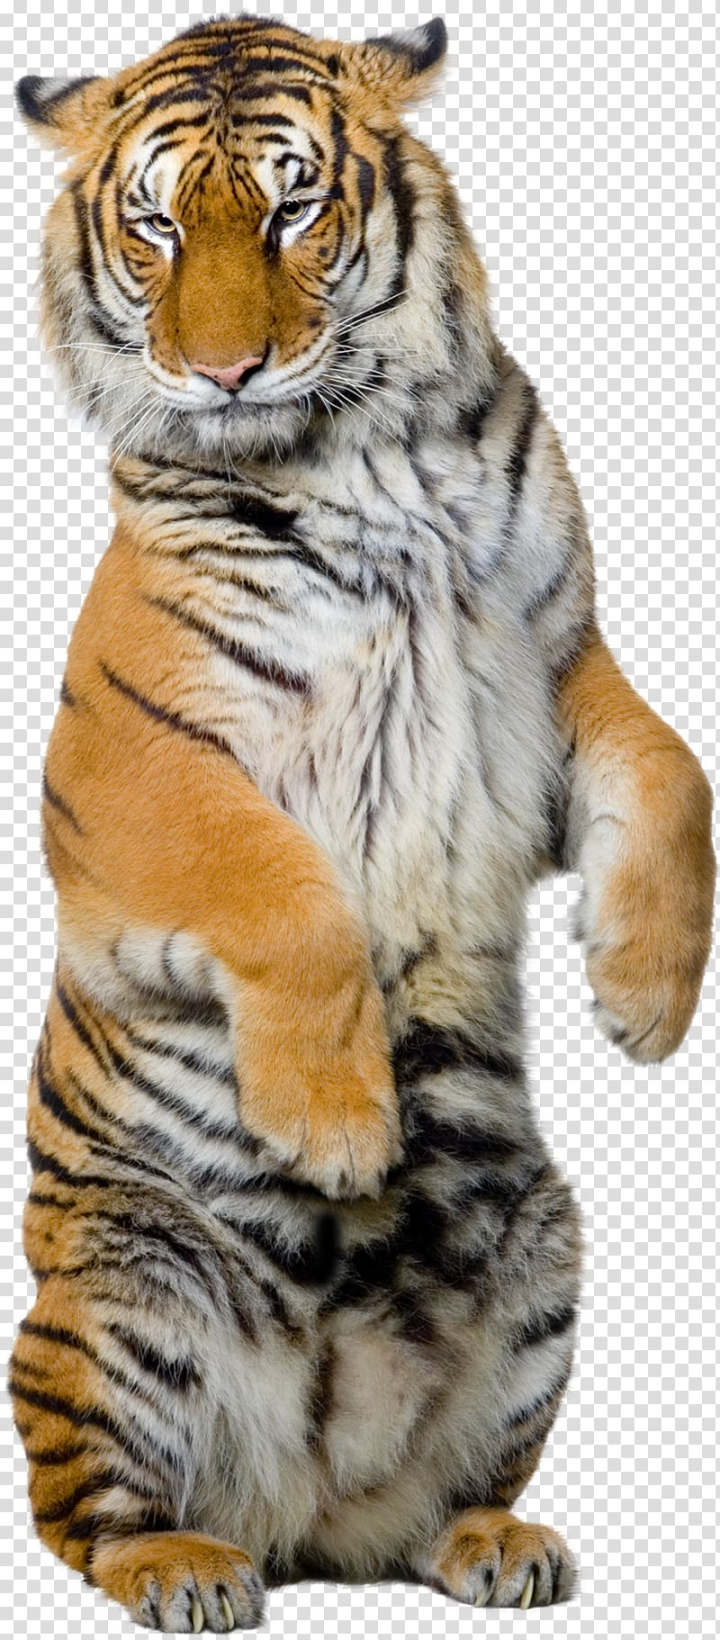 siberian,tiger,sumatran,bengal,white,mammal,animals,cat like mammal,carnivoran,paw,head,wildlife,terrestrial animal,big cats,royaltyfree,animal,snout,whiskers,fur,white tiger,watercolor tiger,tiger vector,tiger head,tiger cartoon,carnivore,stock photography,climbing tiger,closeup,real,fire tiger,raptor,siberian tiger,sumatran tiger,bengal tiger,illustration,png clipart,free png,transparent background,free clipart,clip art,free download,png,comhiclipart